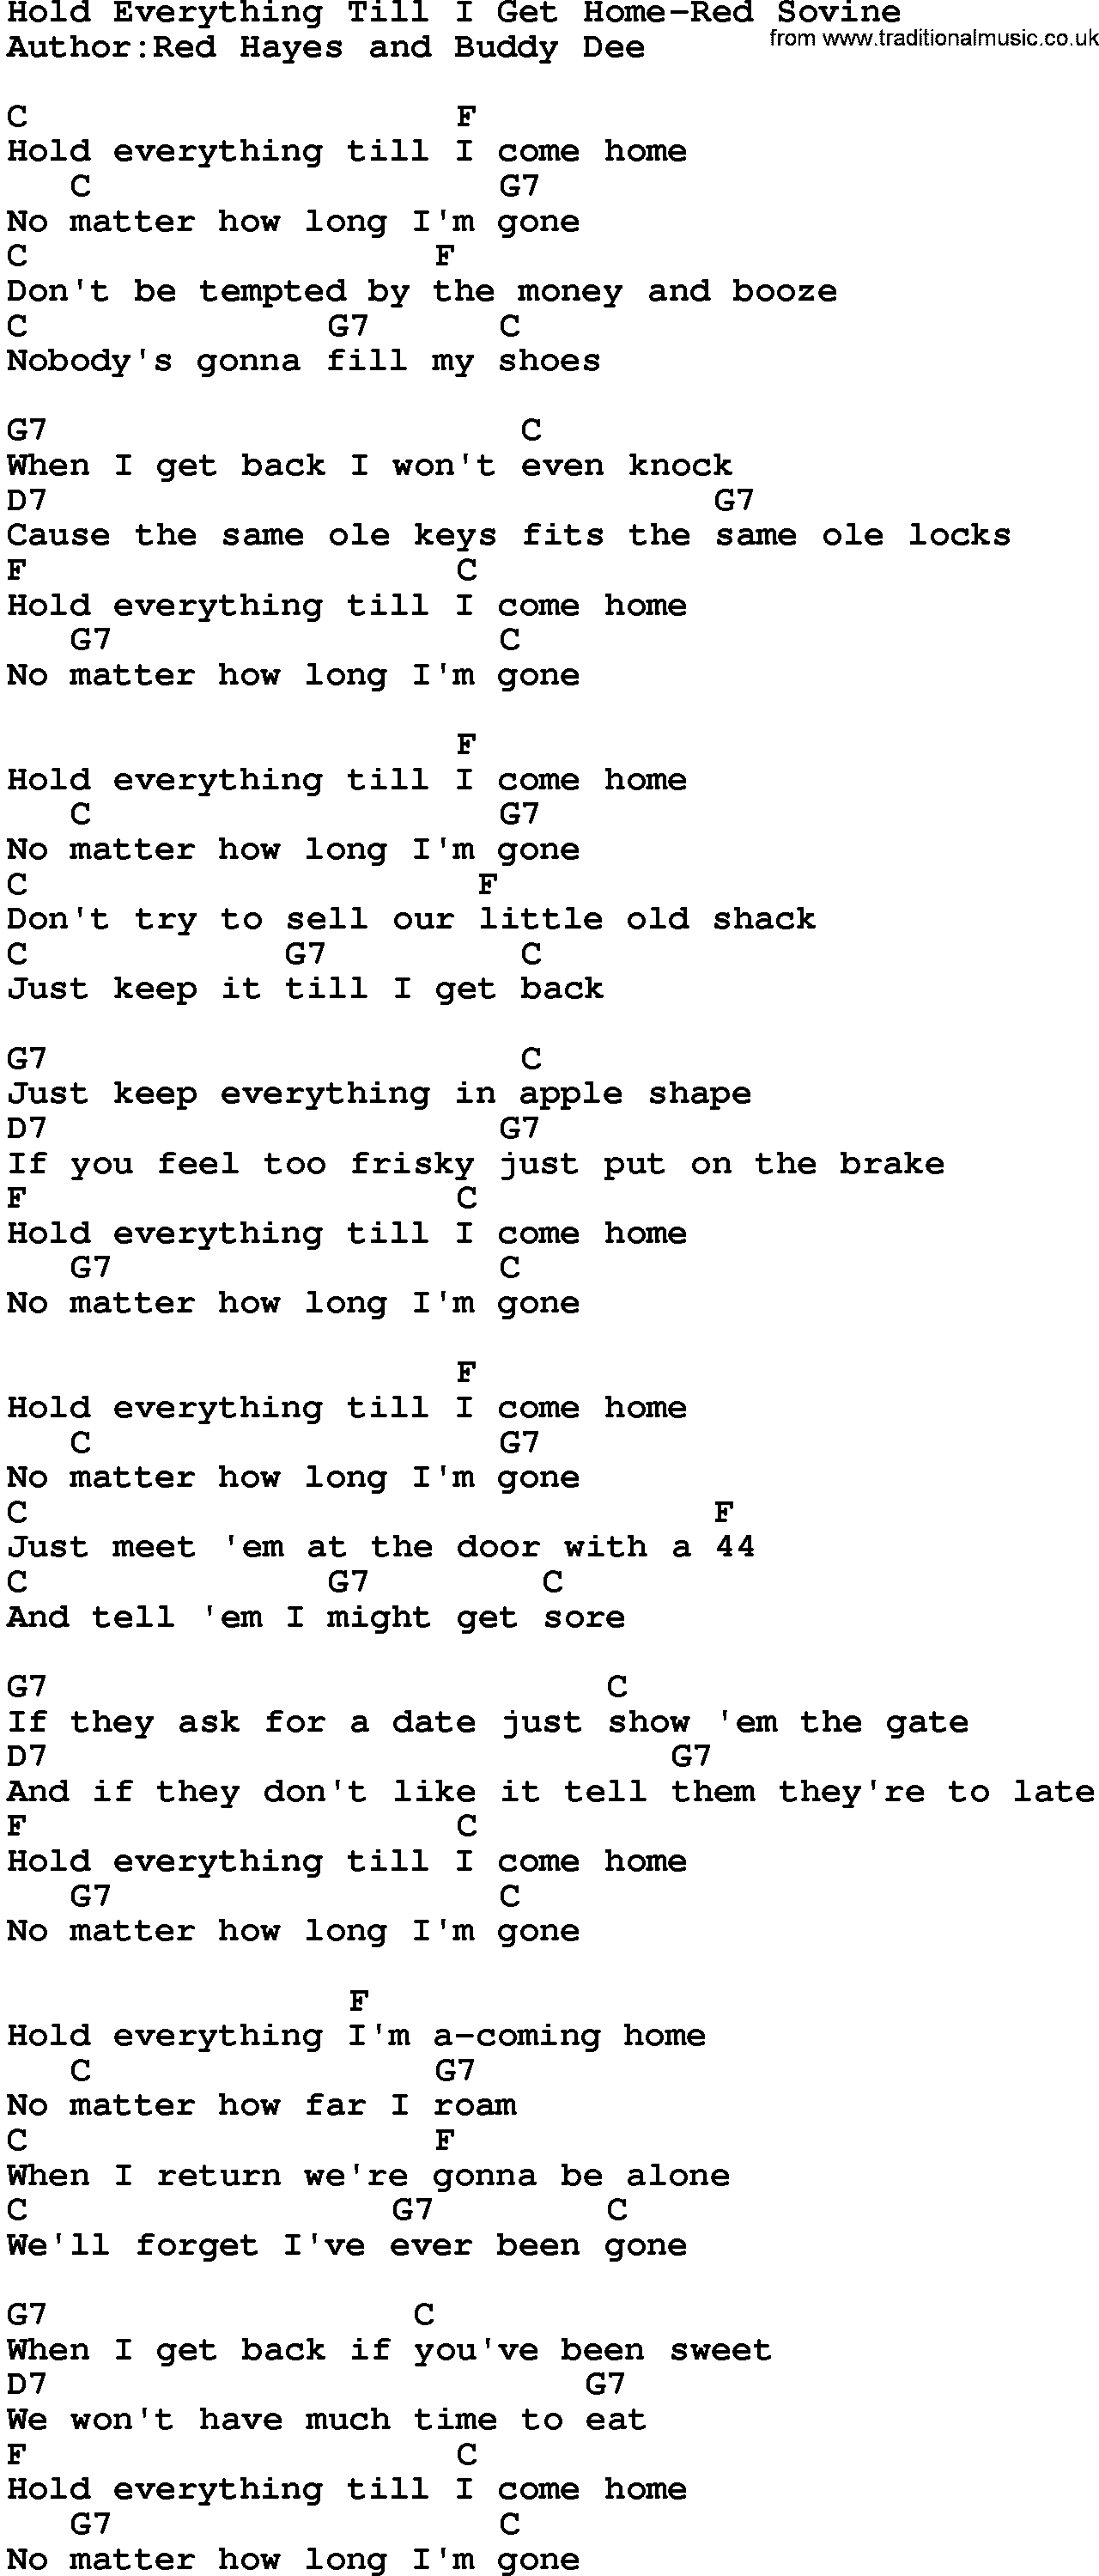 Country music song: Hold Everything Till I Get Home-Red Sovine lyrics and chords